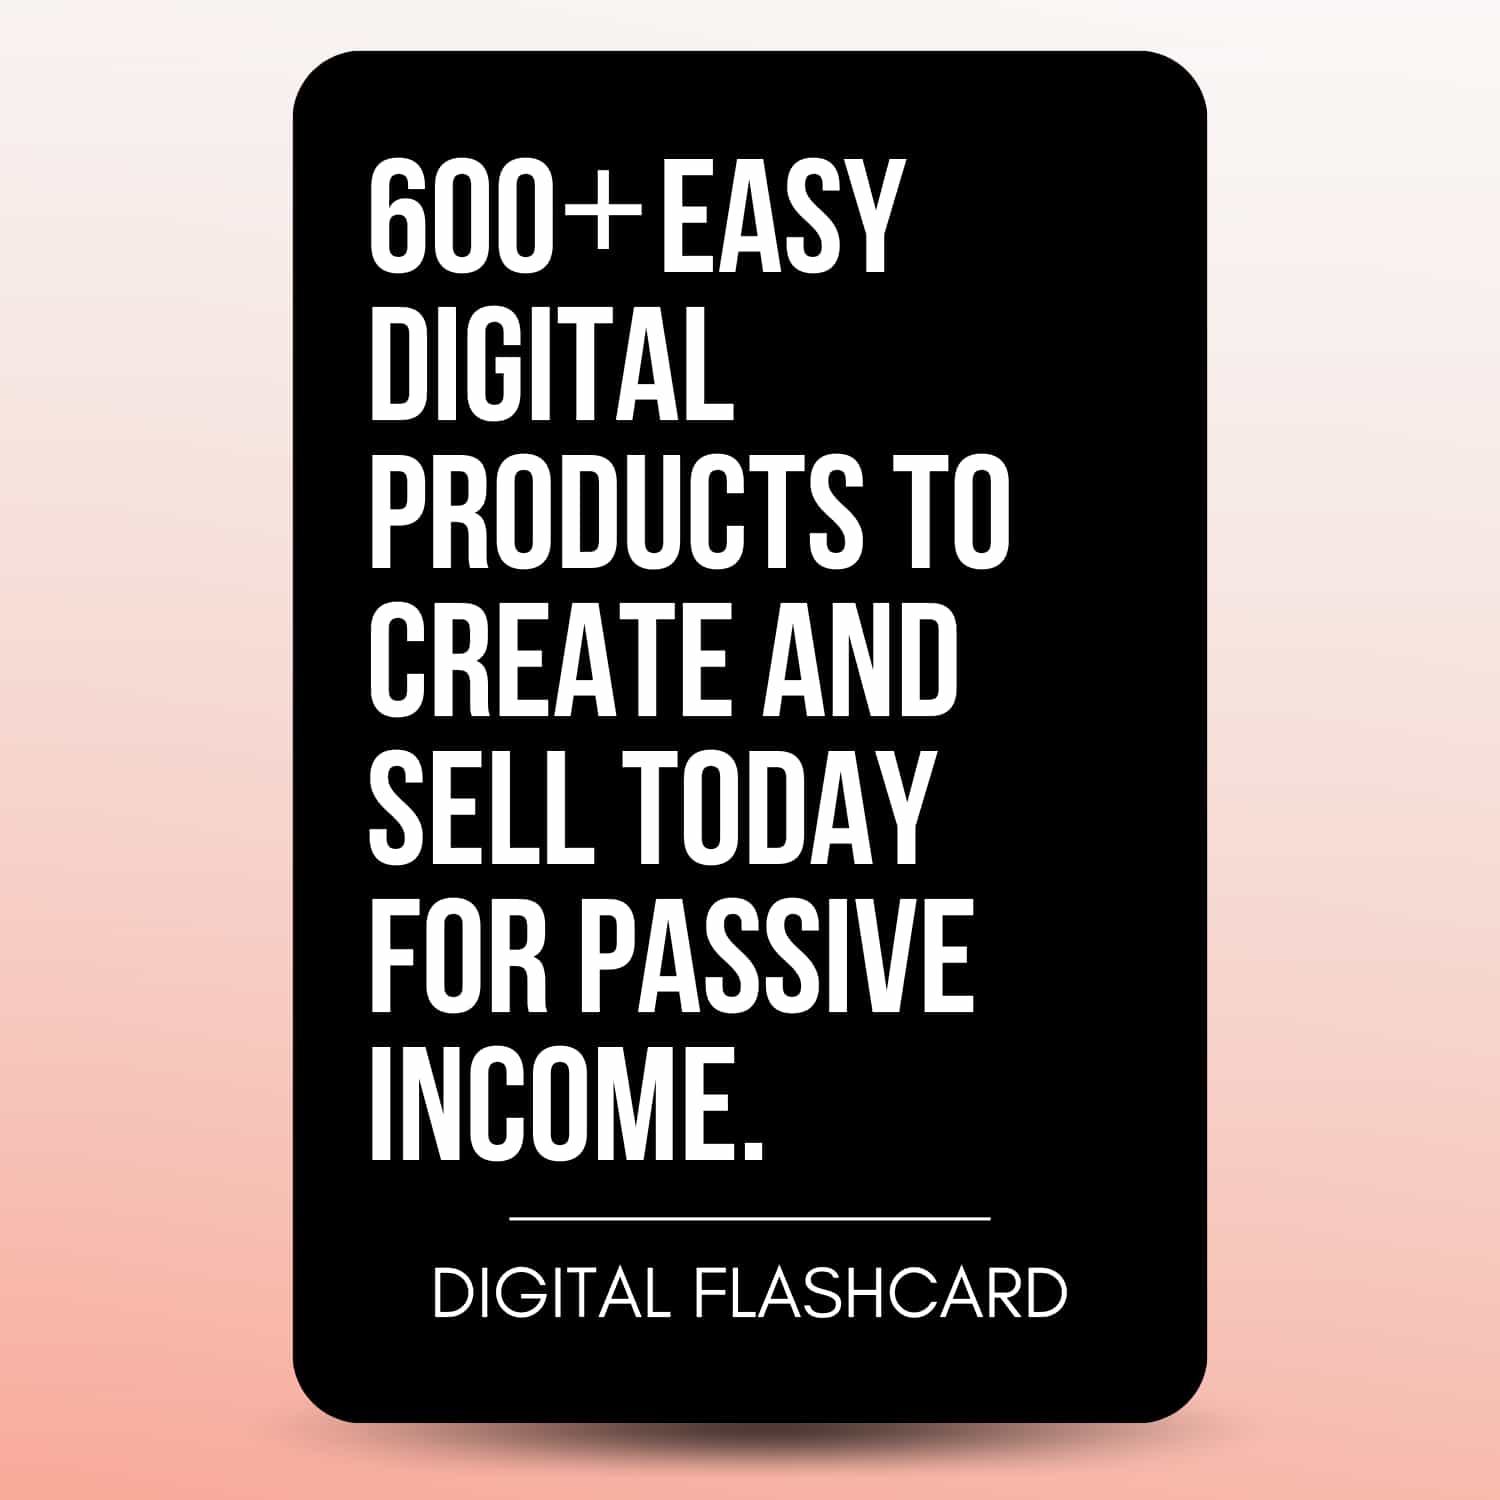 600+ Digital Products Ideas To Create And Sell Today For Passive Incom ...